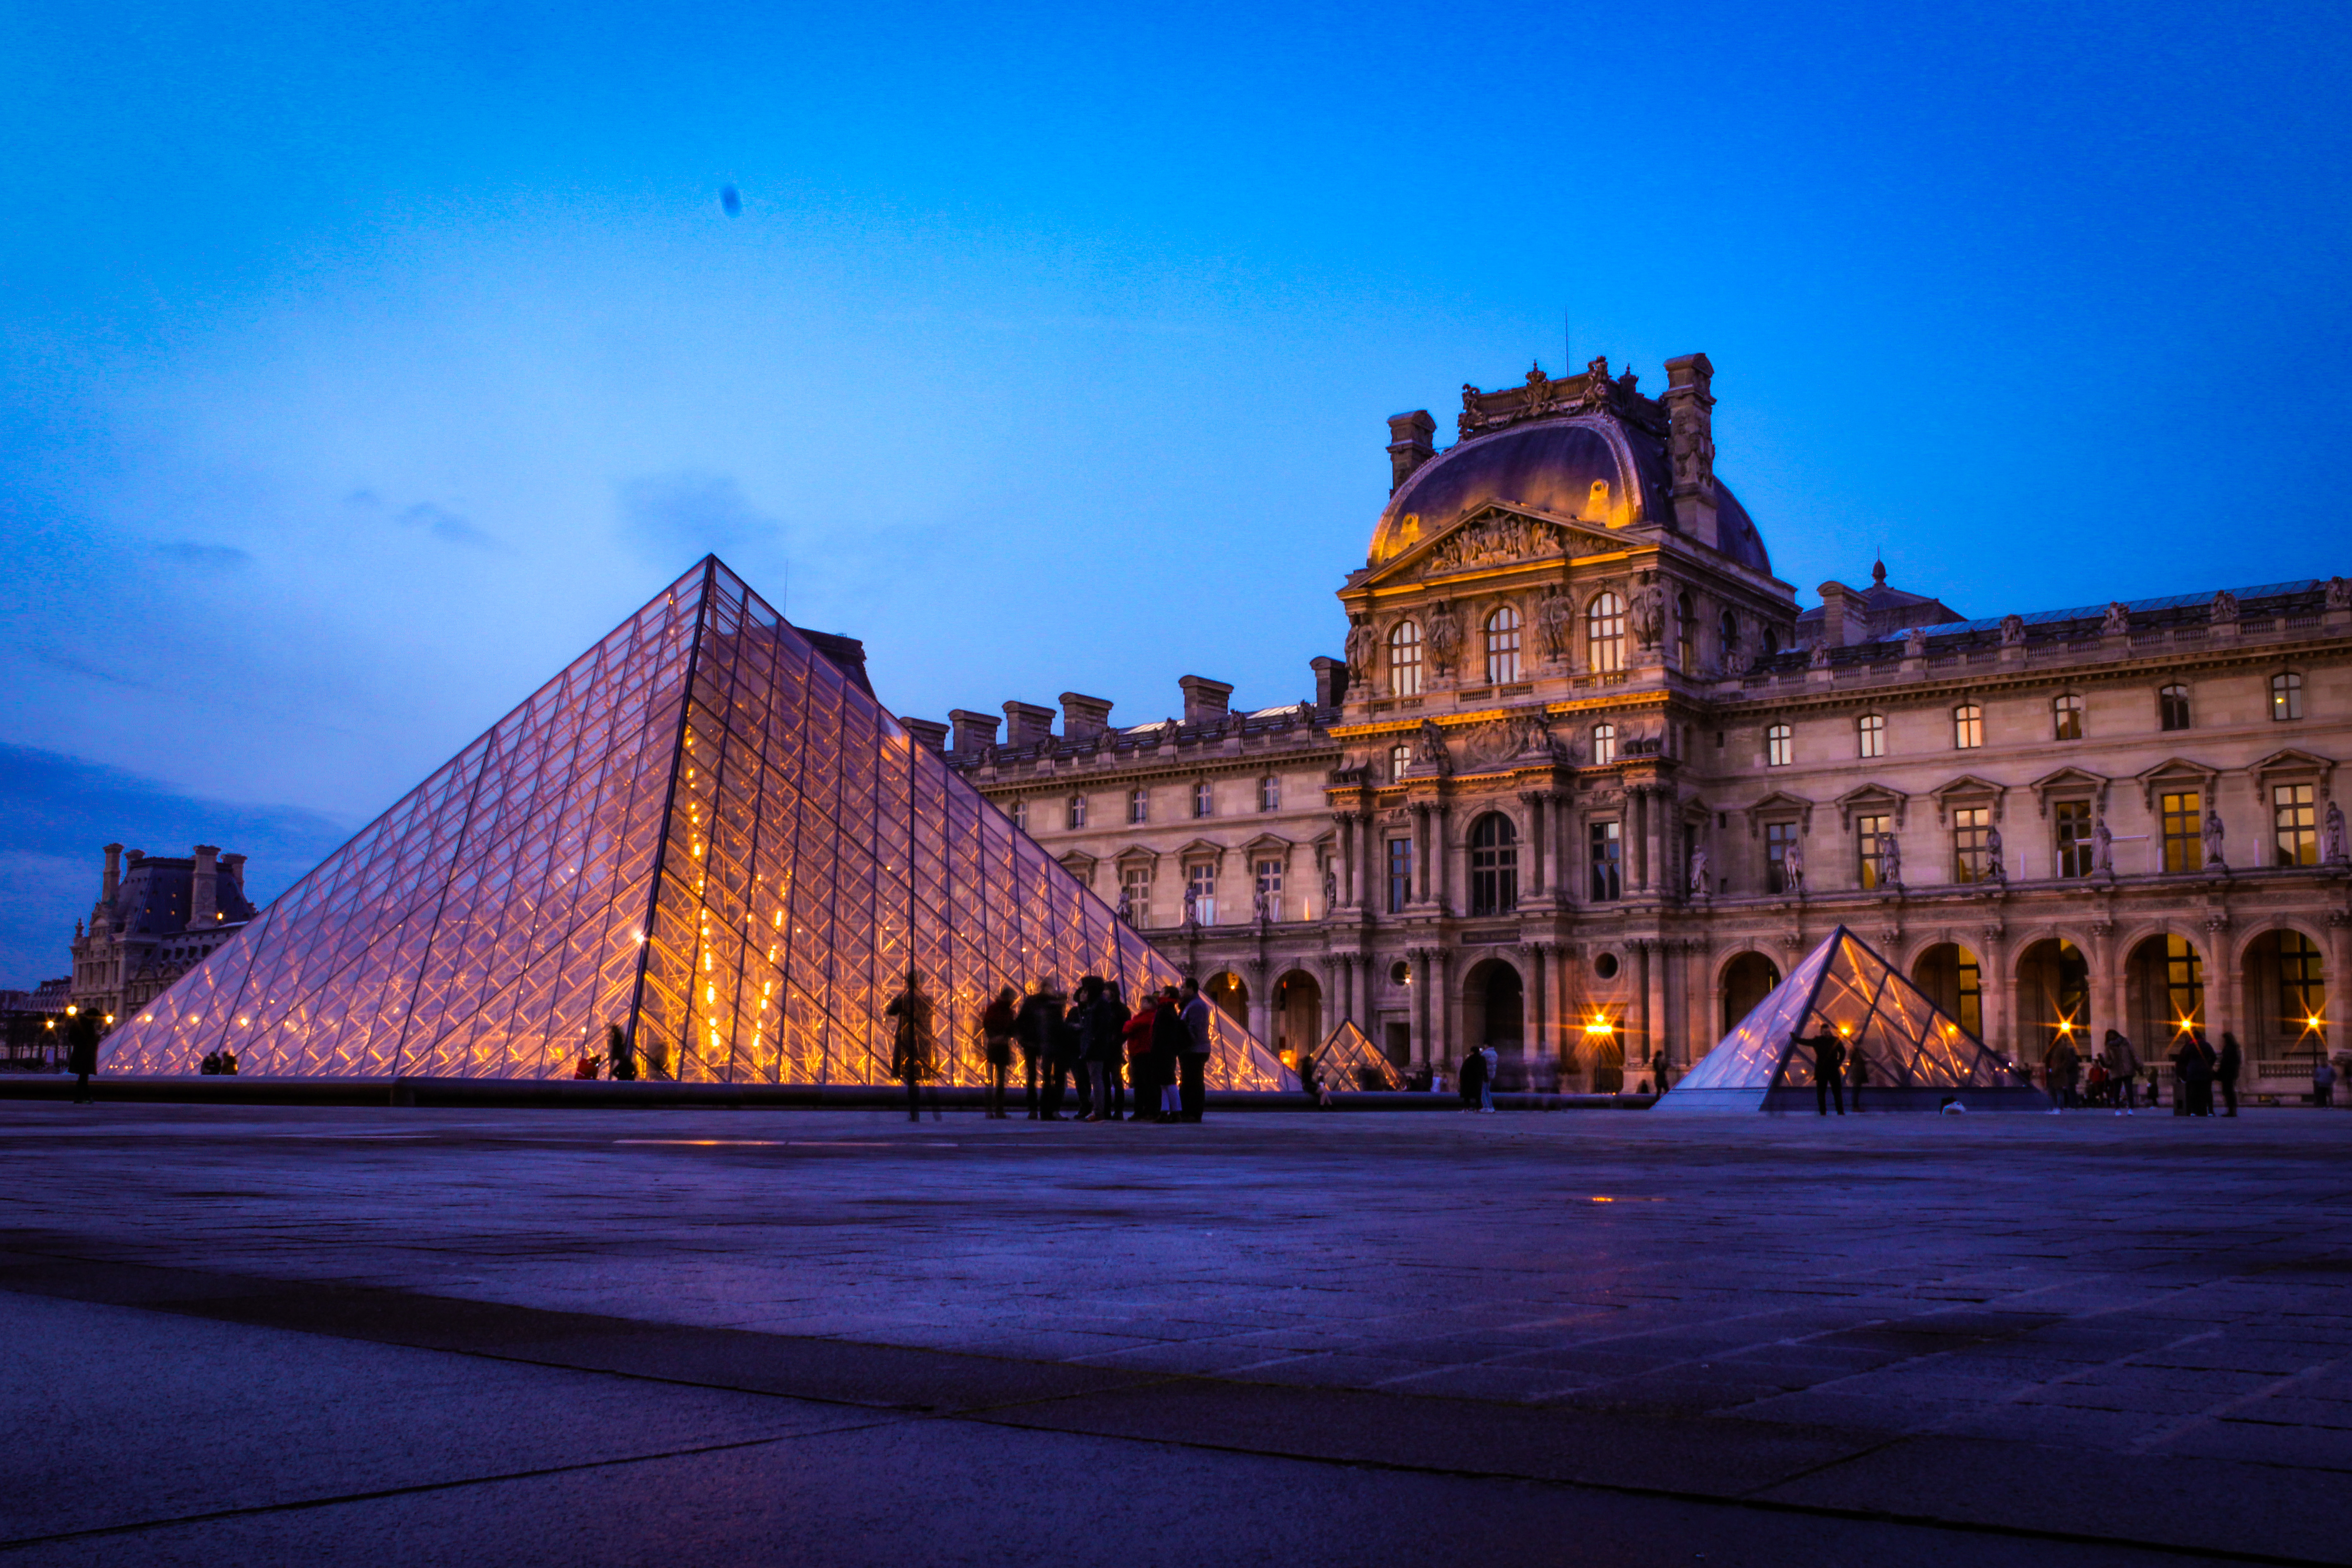 HEC Paris MBA student Tonny's picture of the Louvre at night